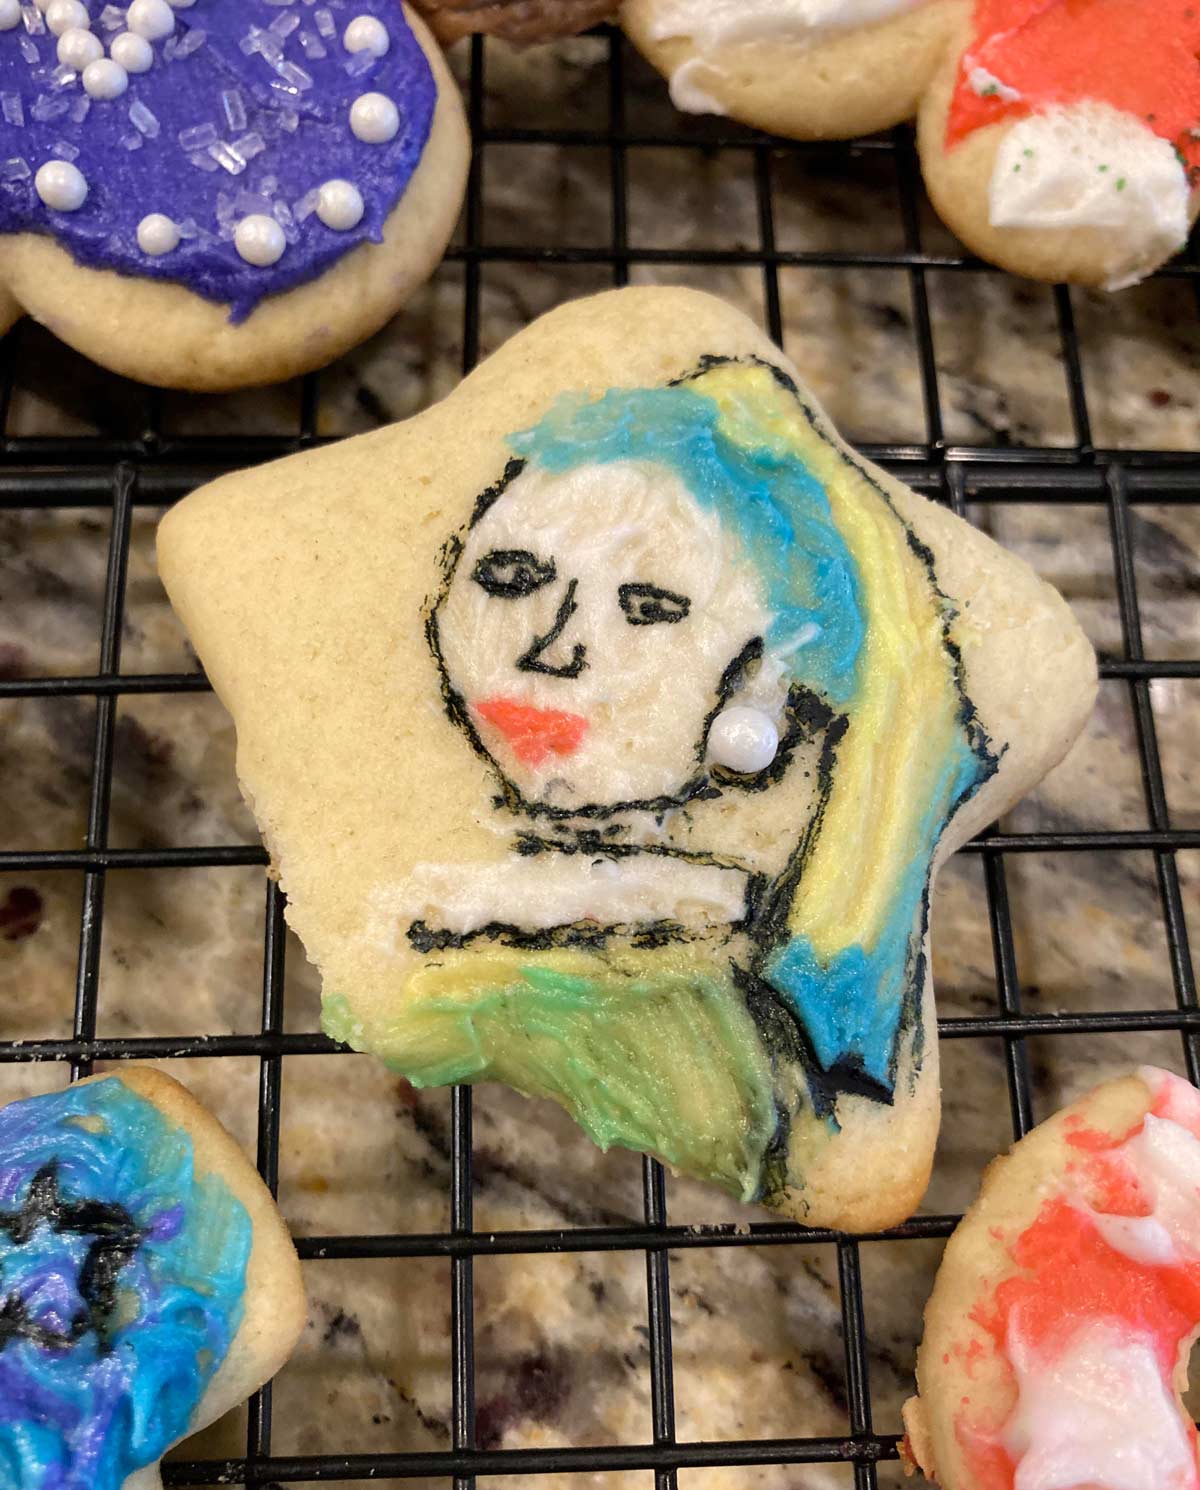 I made an attempt at this year's Christmas cookie decorating contest